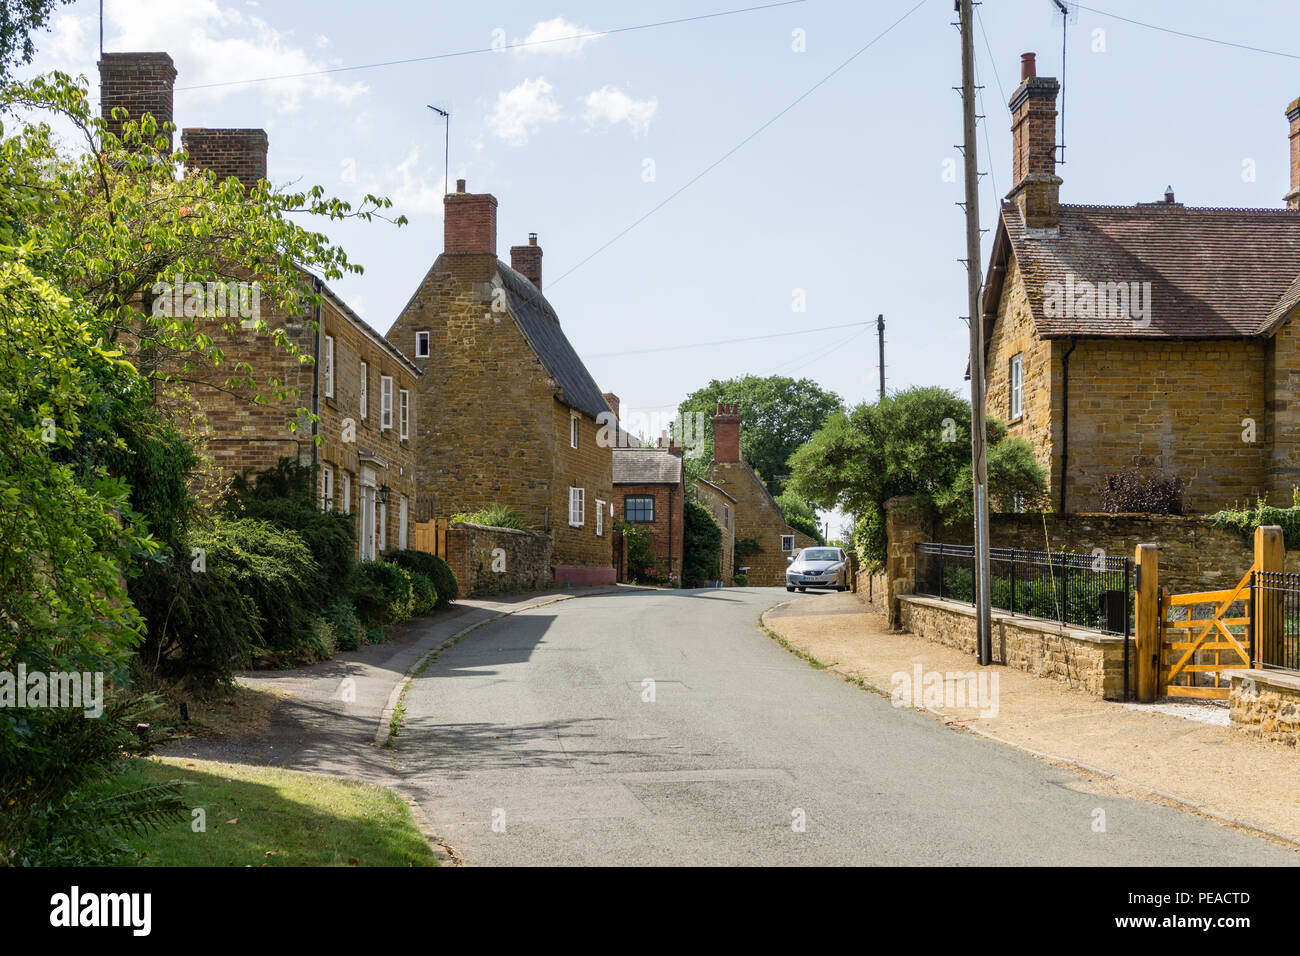 A view along the High Street in the pretty village of Little Brington, Northamptonshire, UK Stock Photo